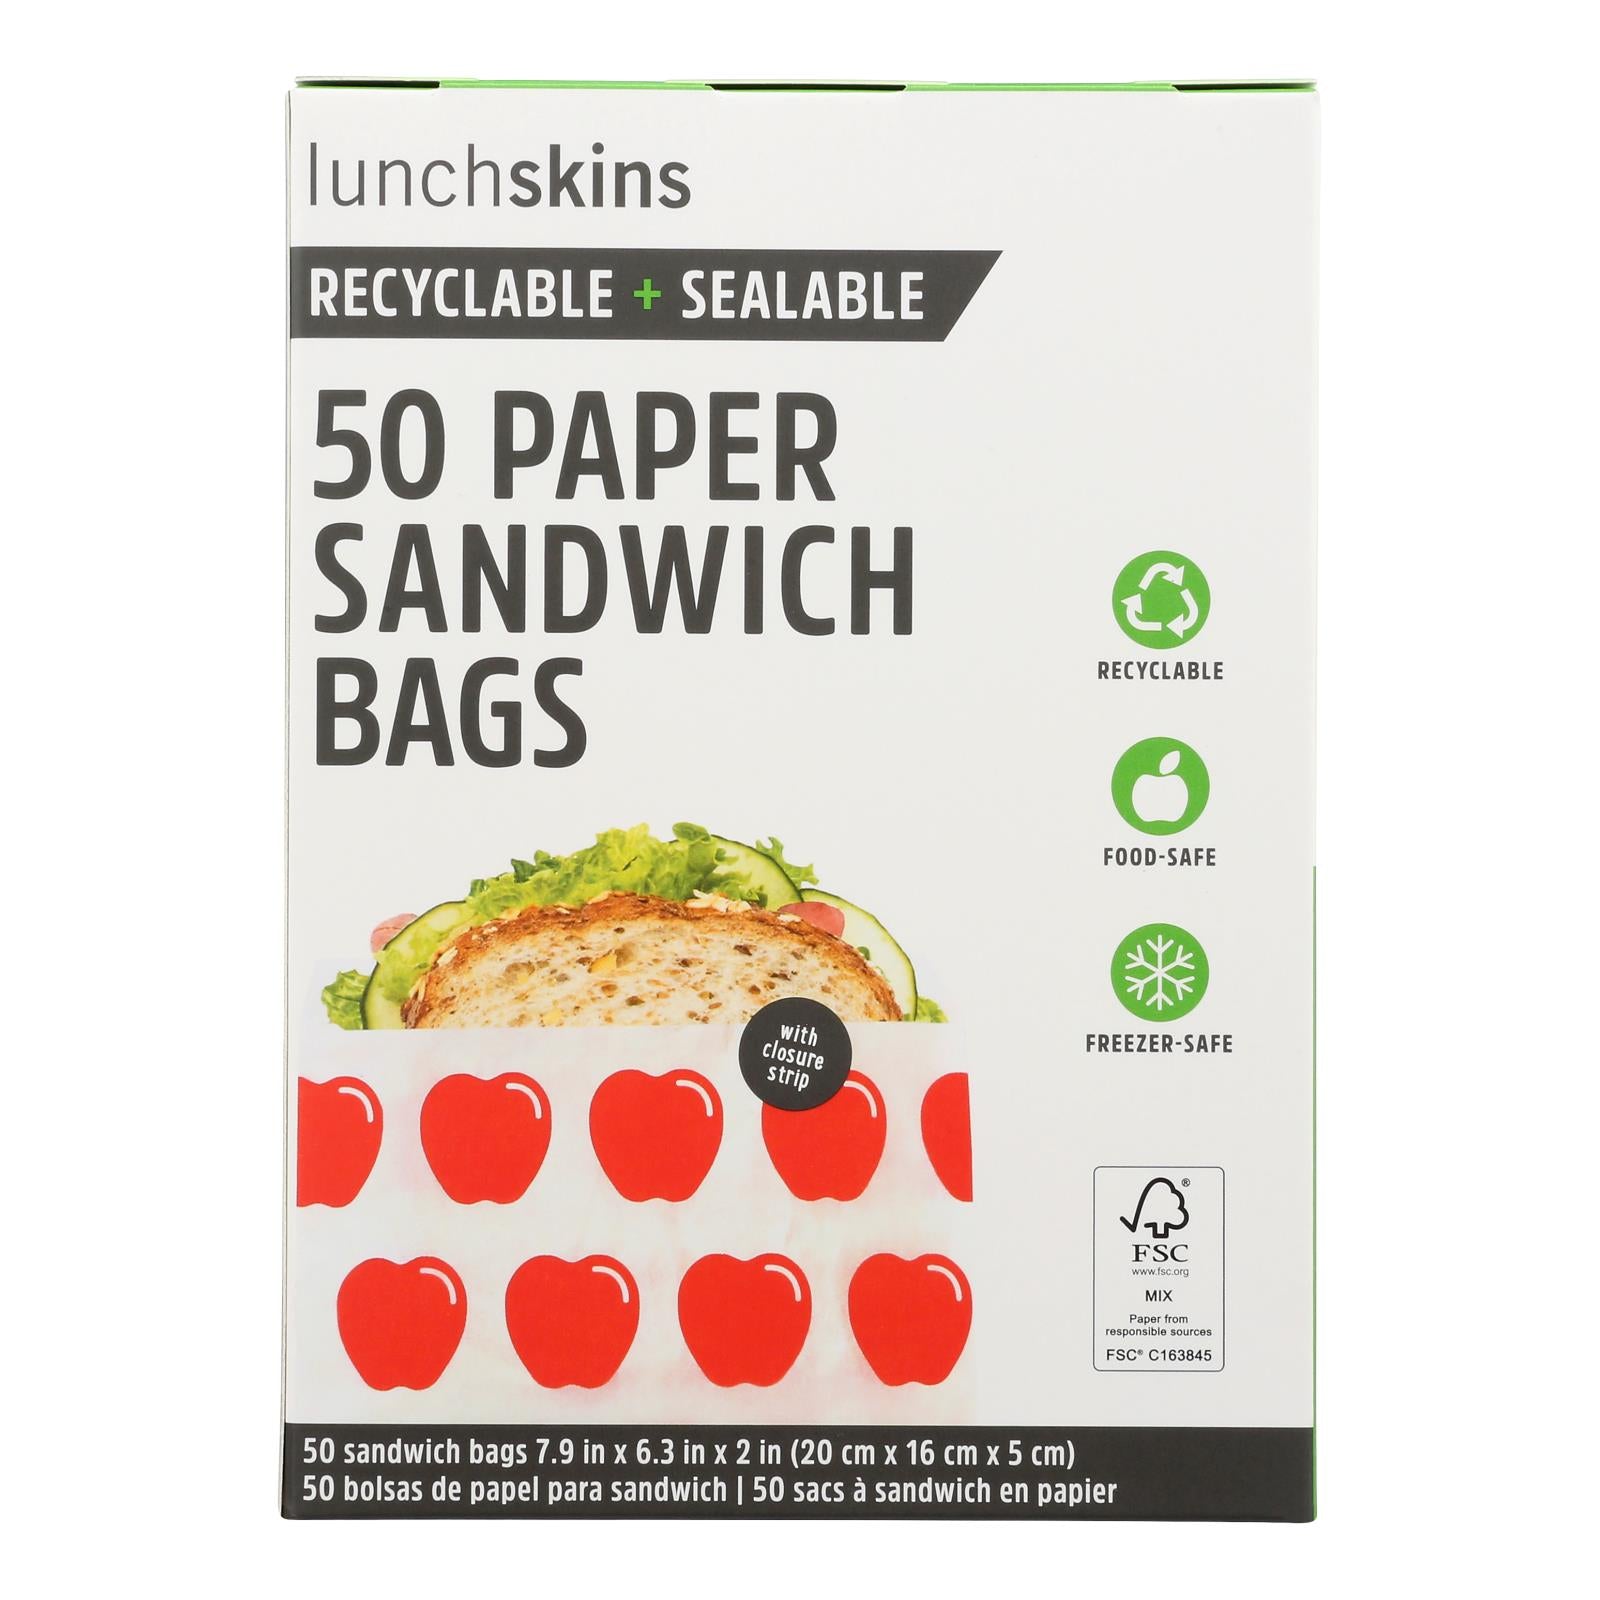 Lunchskins - Recyclable And Sealable Paper Sandwich Bags - Red Apple - Case Of 12 - 50 Count